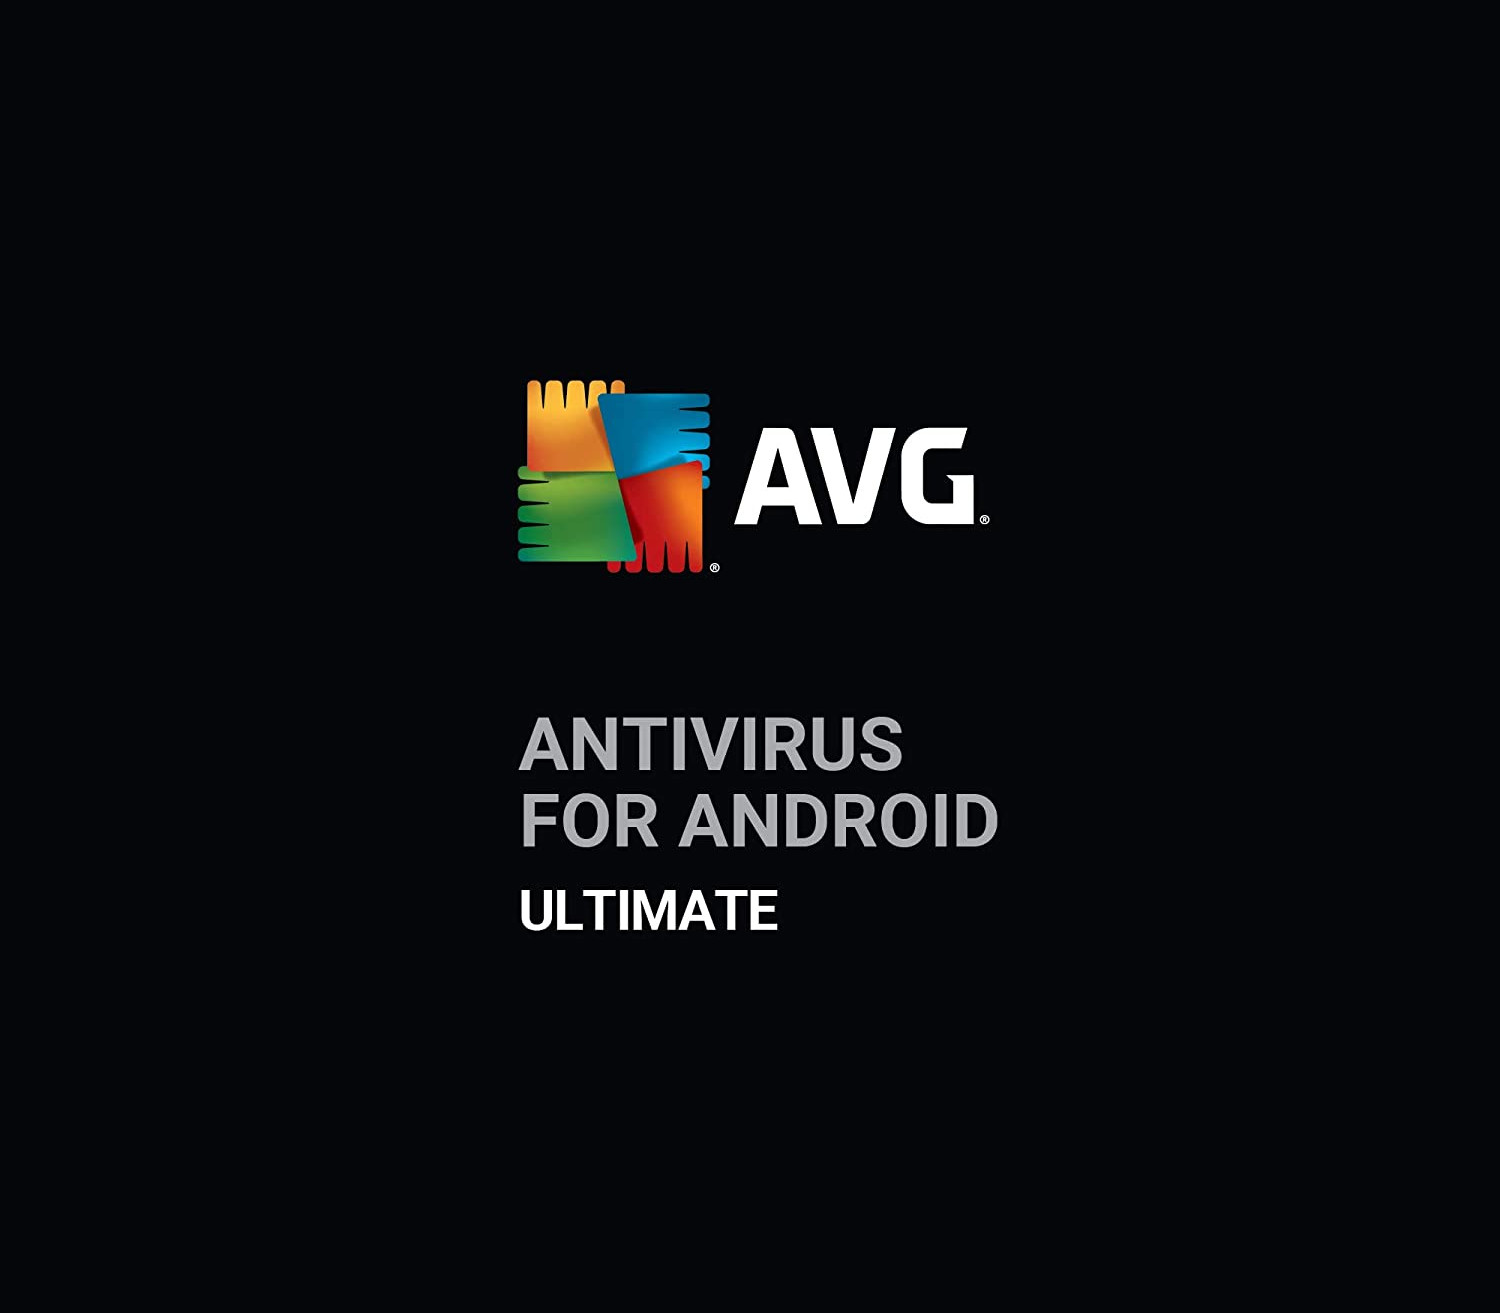 [$ 6.84] AVG Antivirus for Android - Ultimate Key (1 Year / 1 Device)